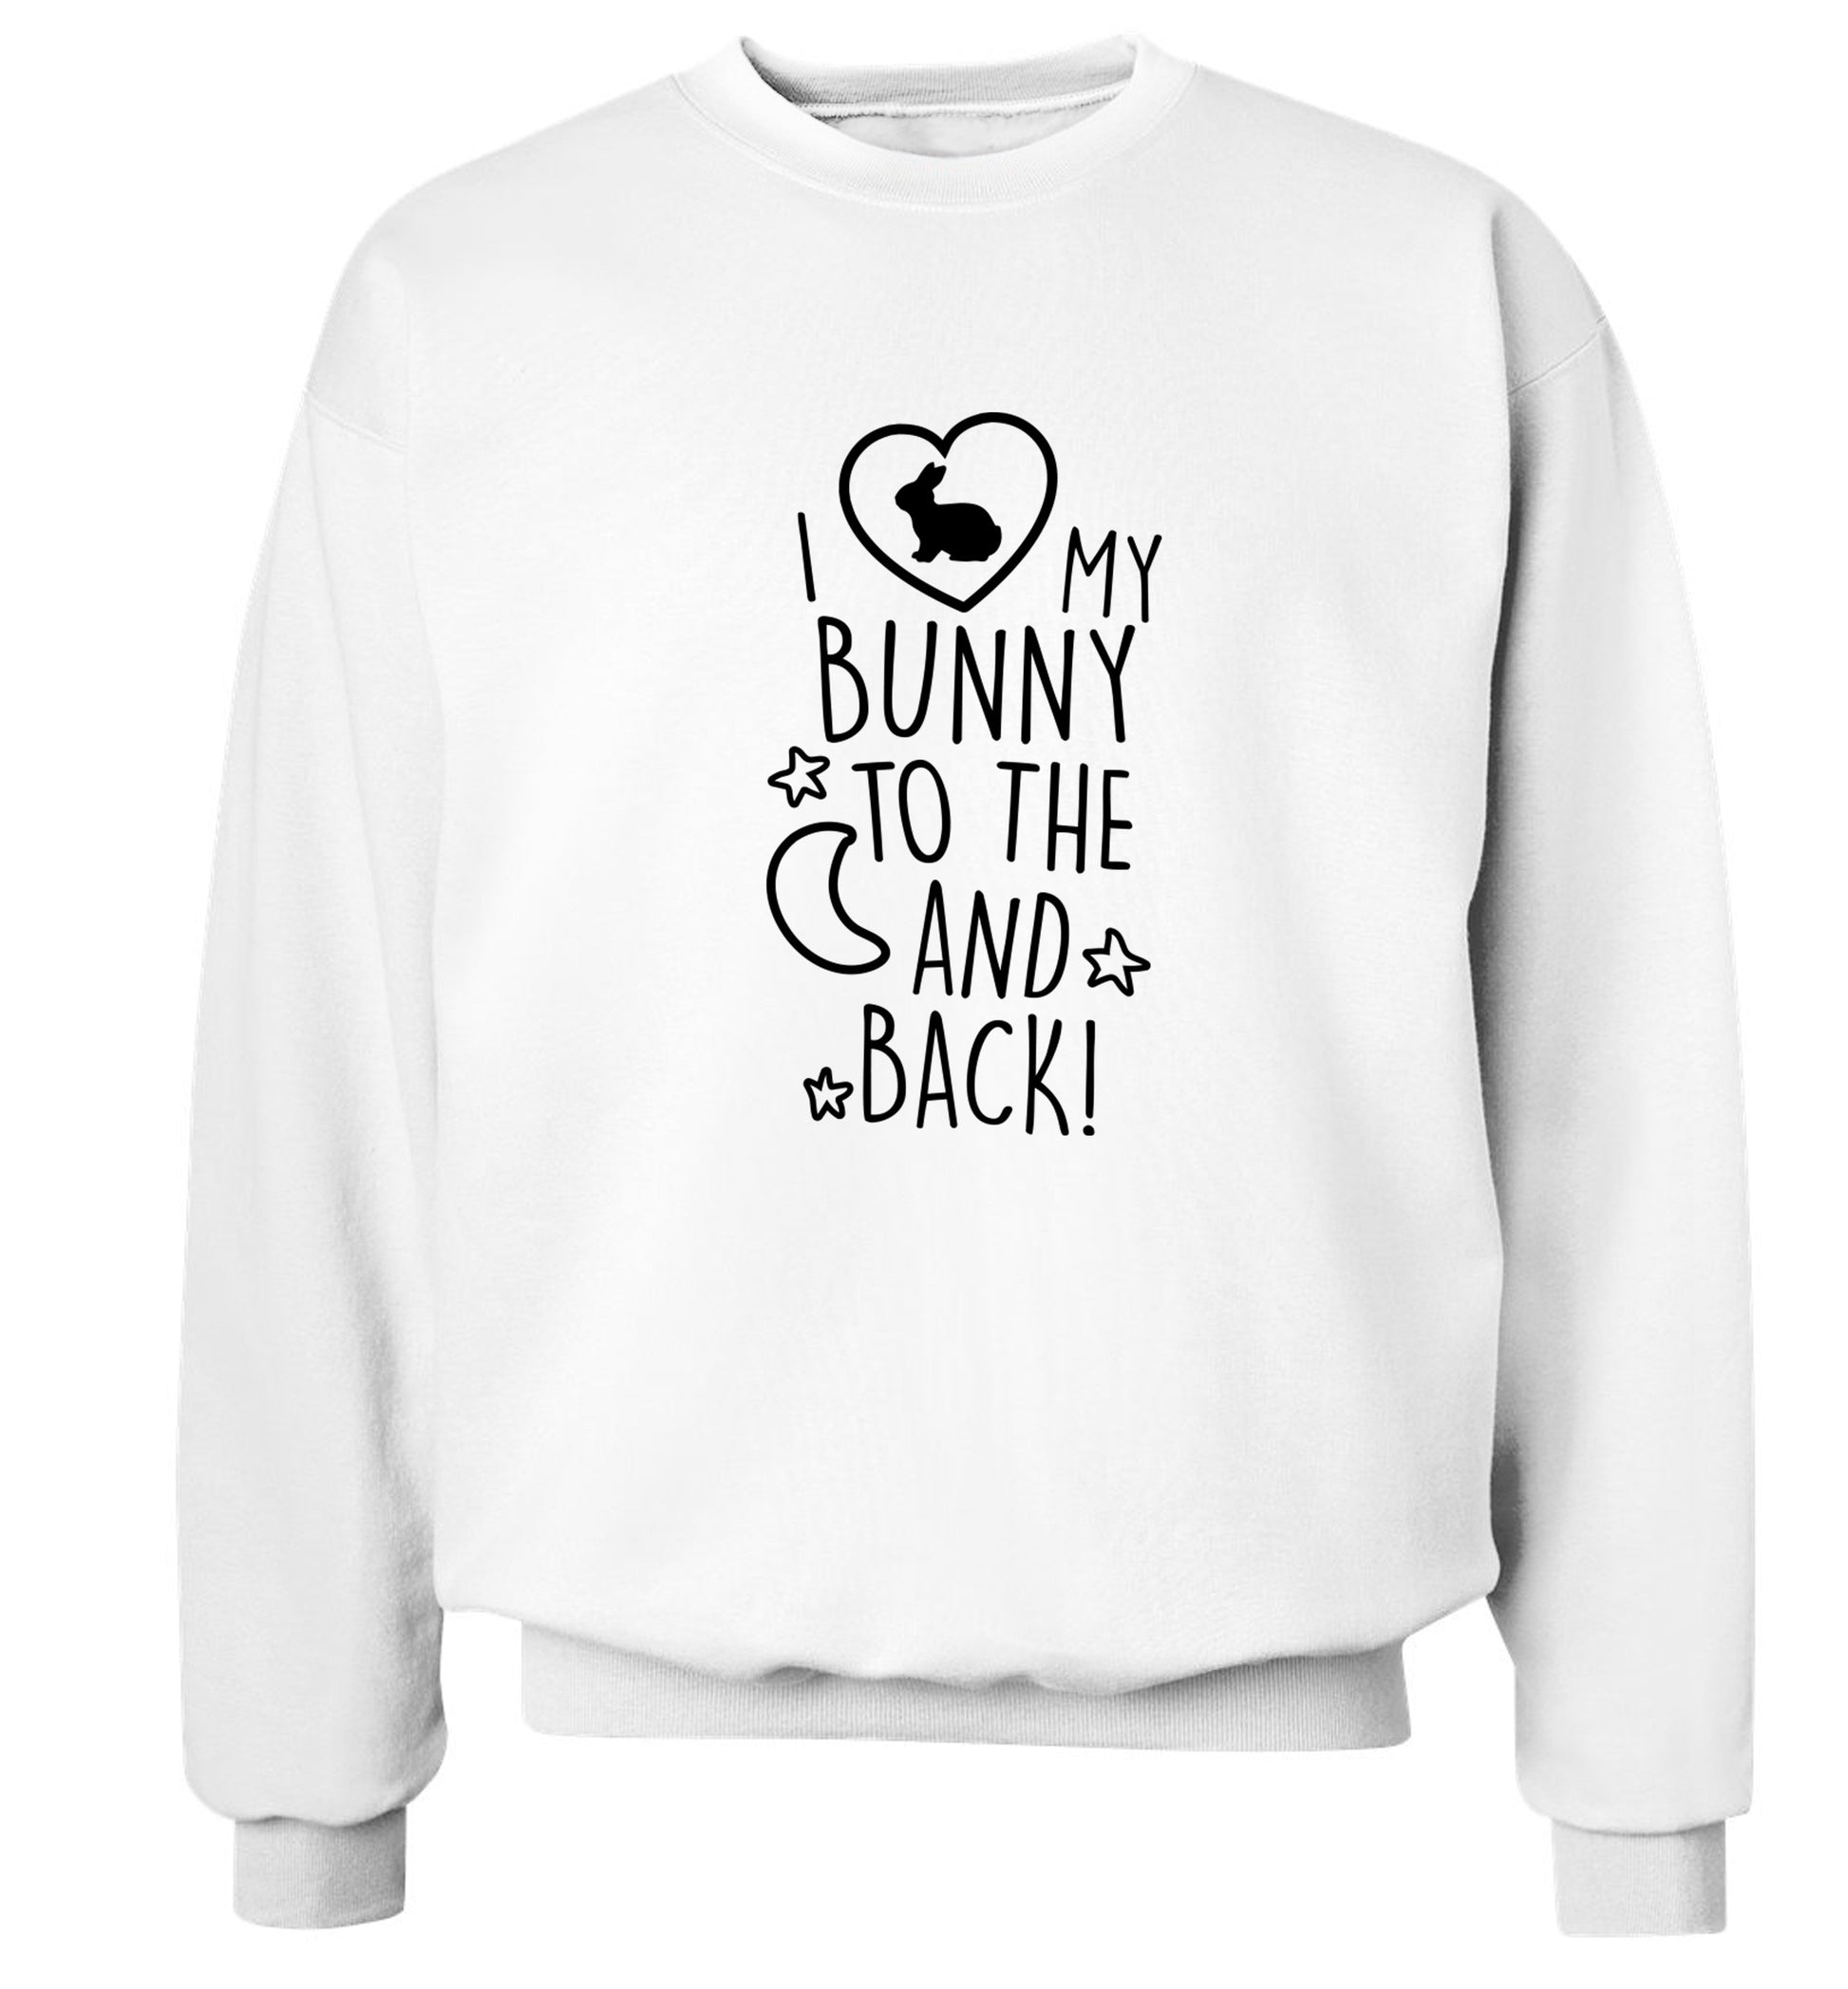 I love my bunny to the moon and back Adult's unisex white  sweater 2XL